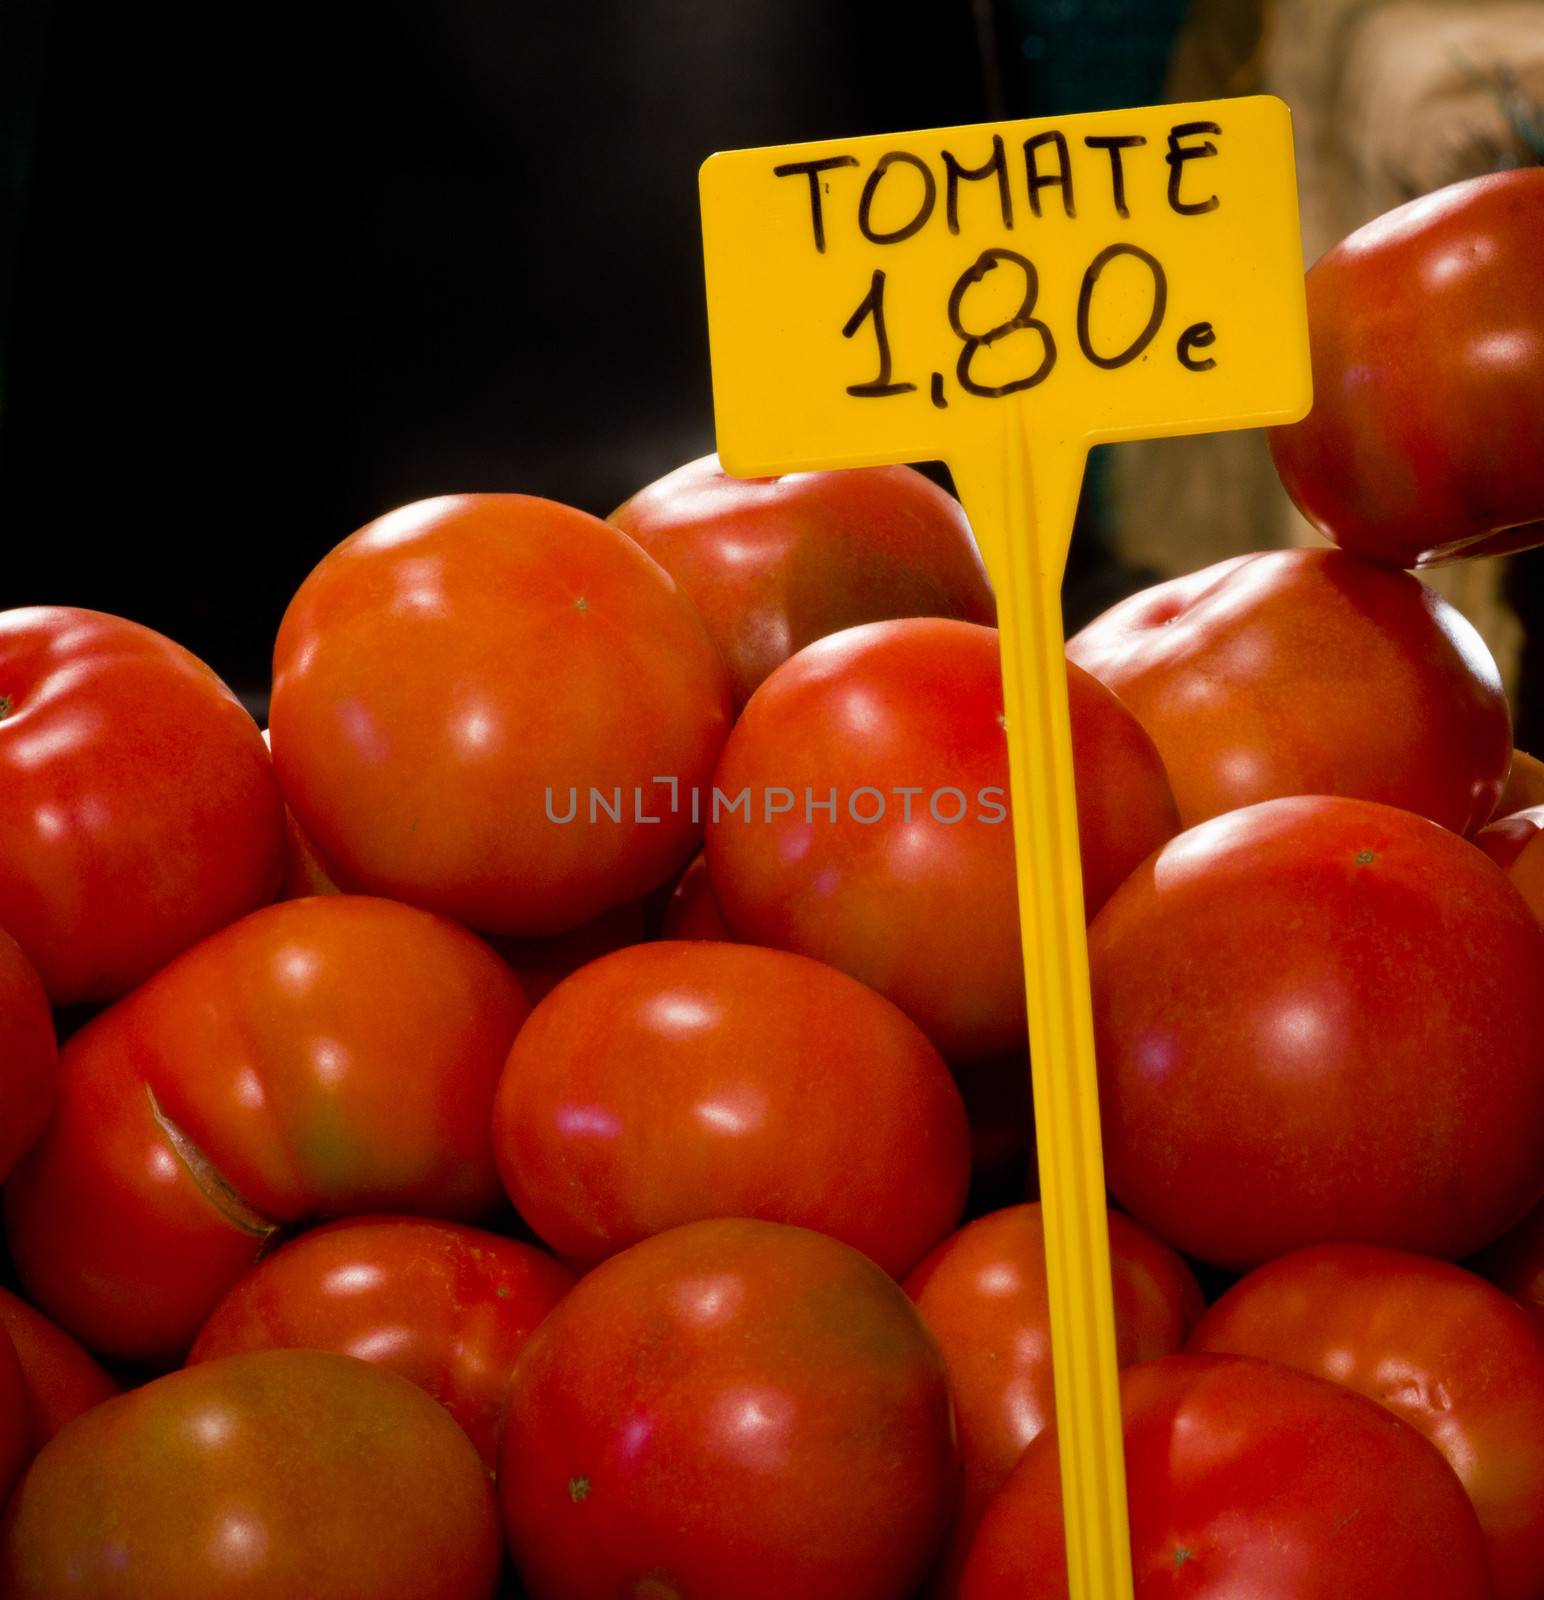 fresh tomatoes with price in euros